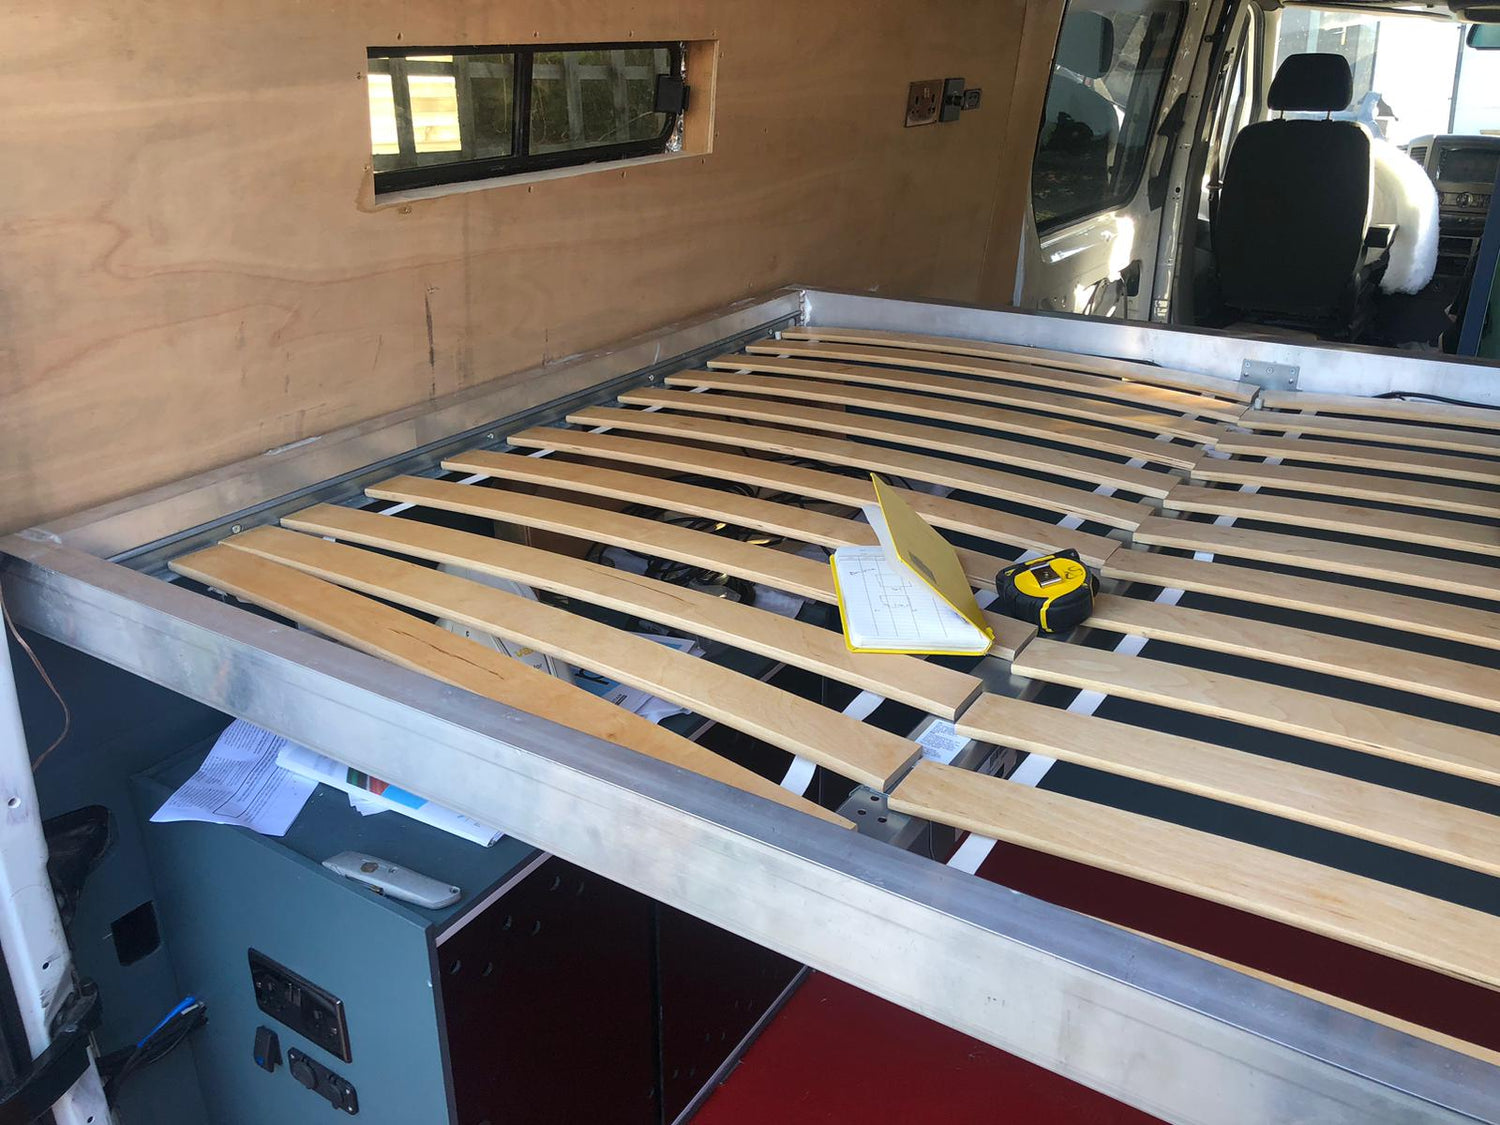 Custom aluminum bed frame designed to perfectly fit a mattress inside a campervan, featuring a sleek and sturdy metal construction for a snug and secure mattress placement, optimizing space in a compact living environment.